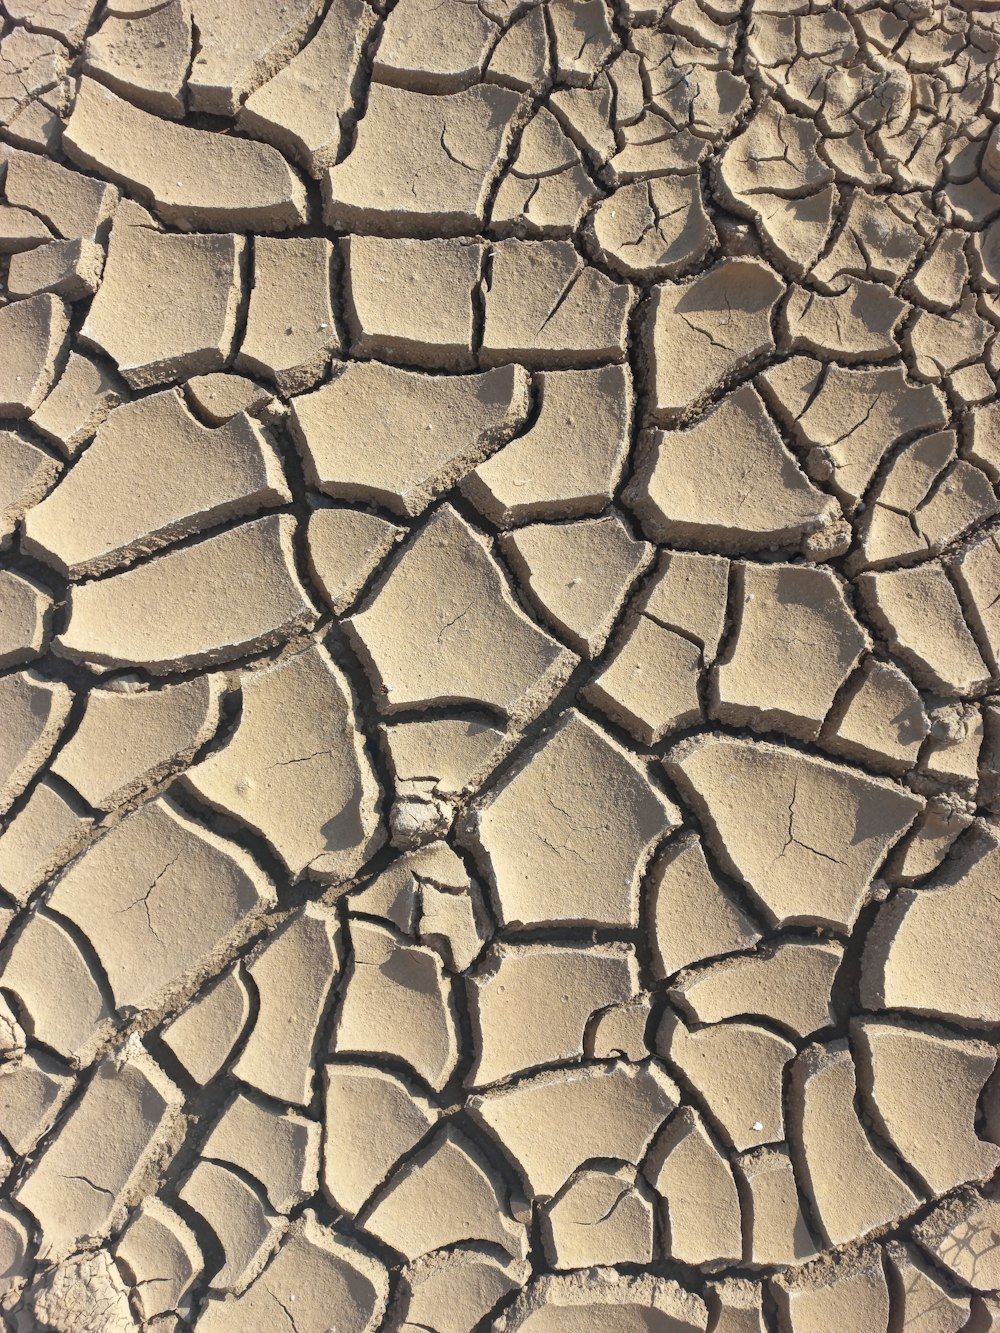 a close up of a cracked surface of dirt